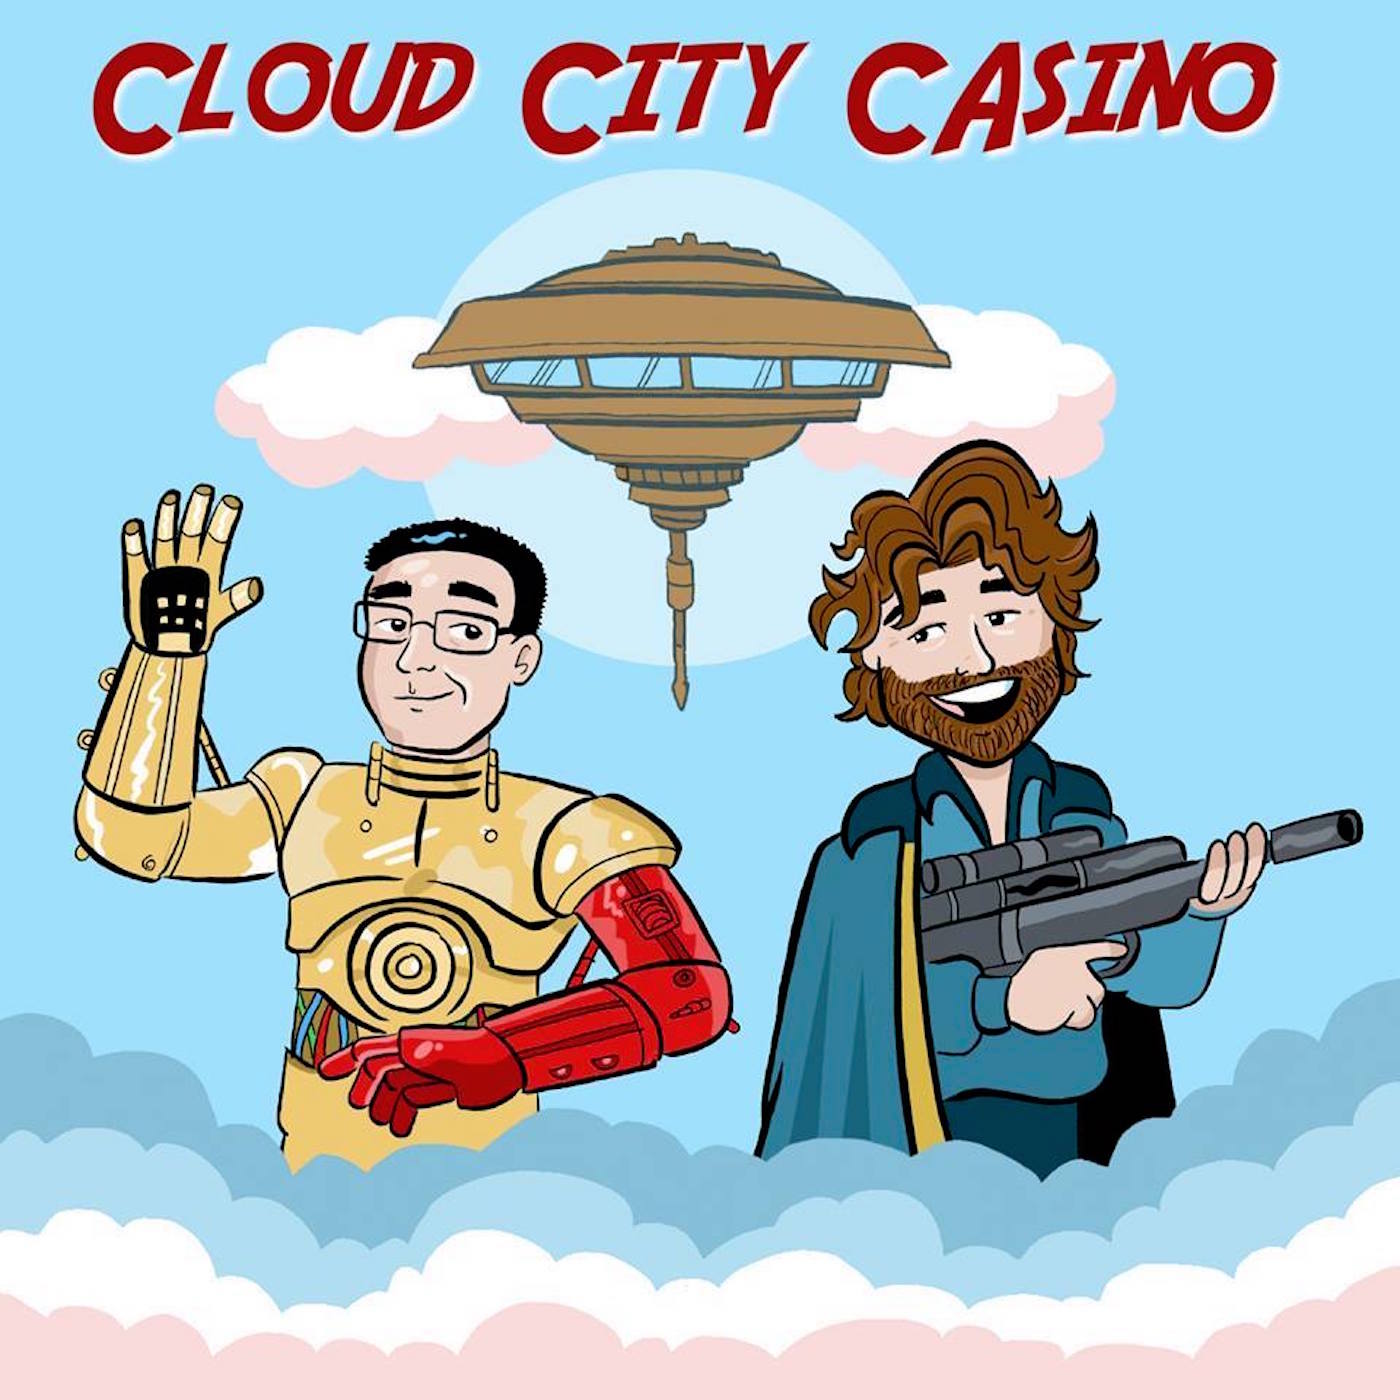 Cloud City Casino - YOUR Star Wars Gaming podcast